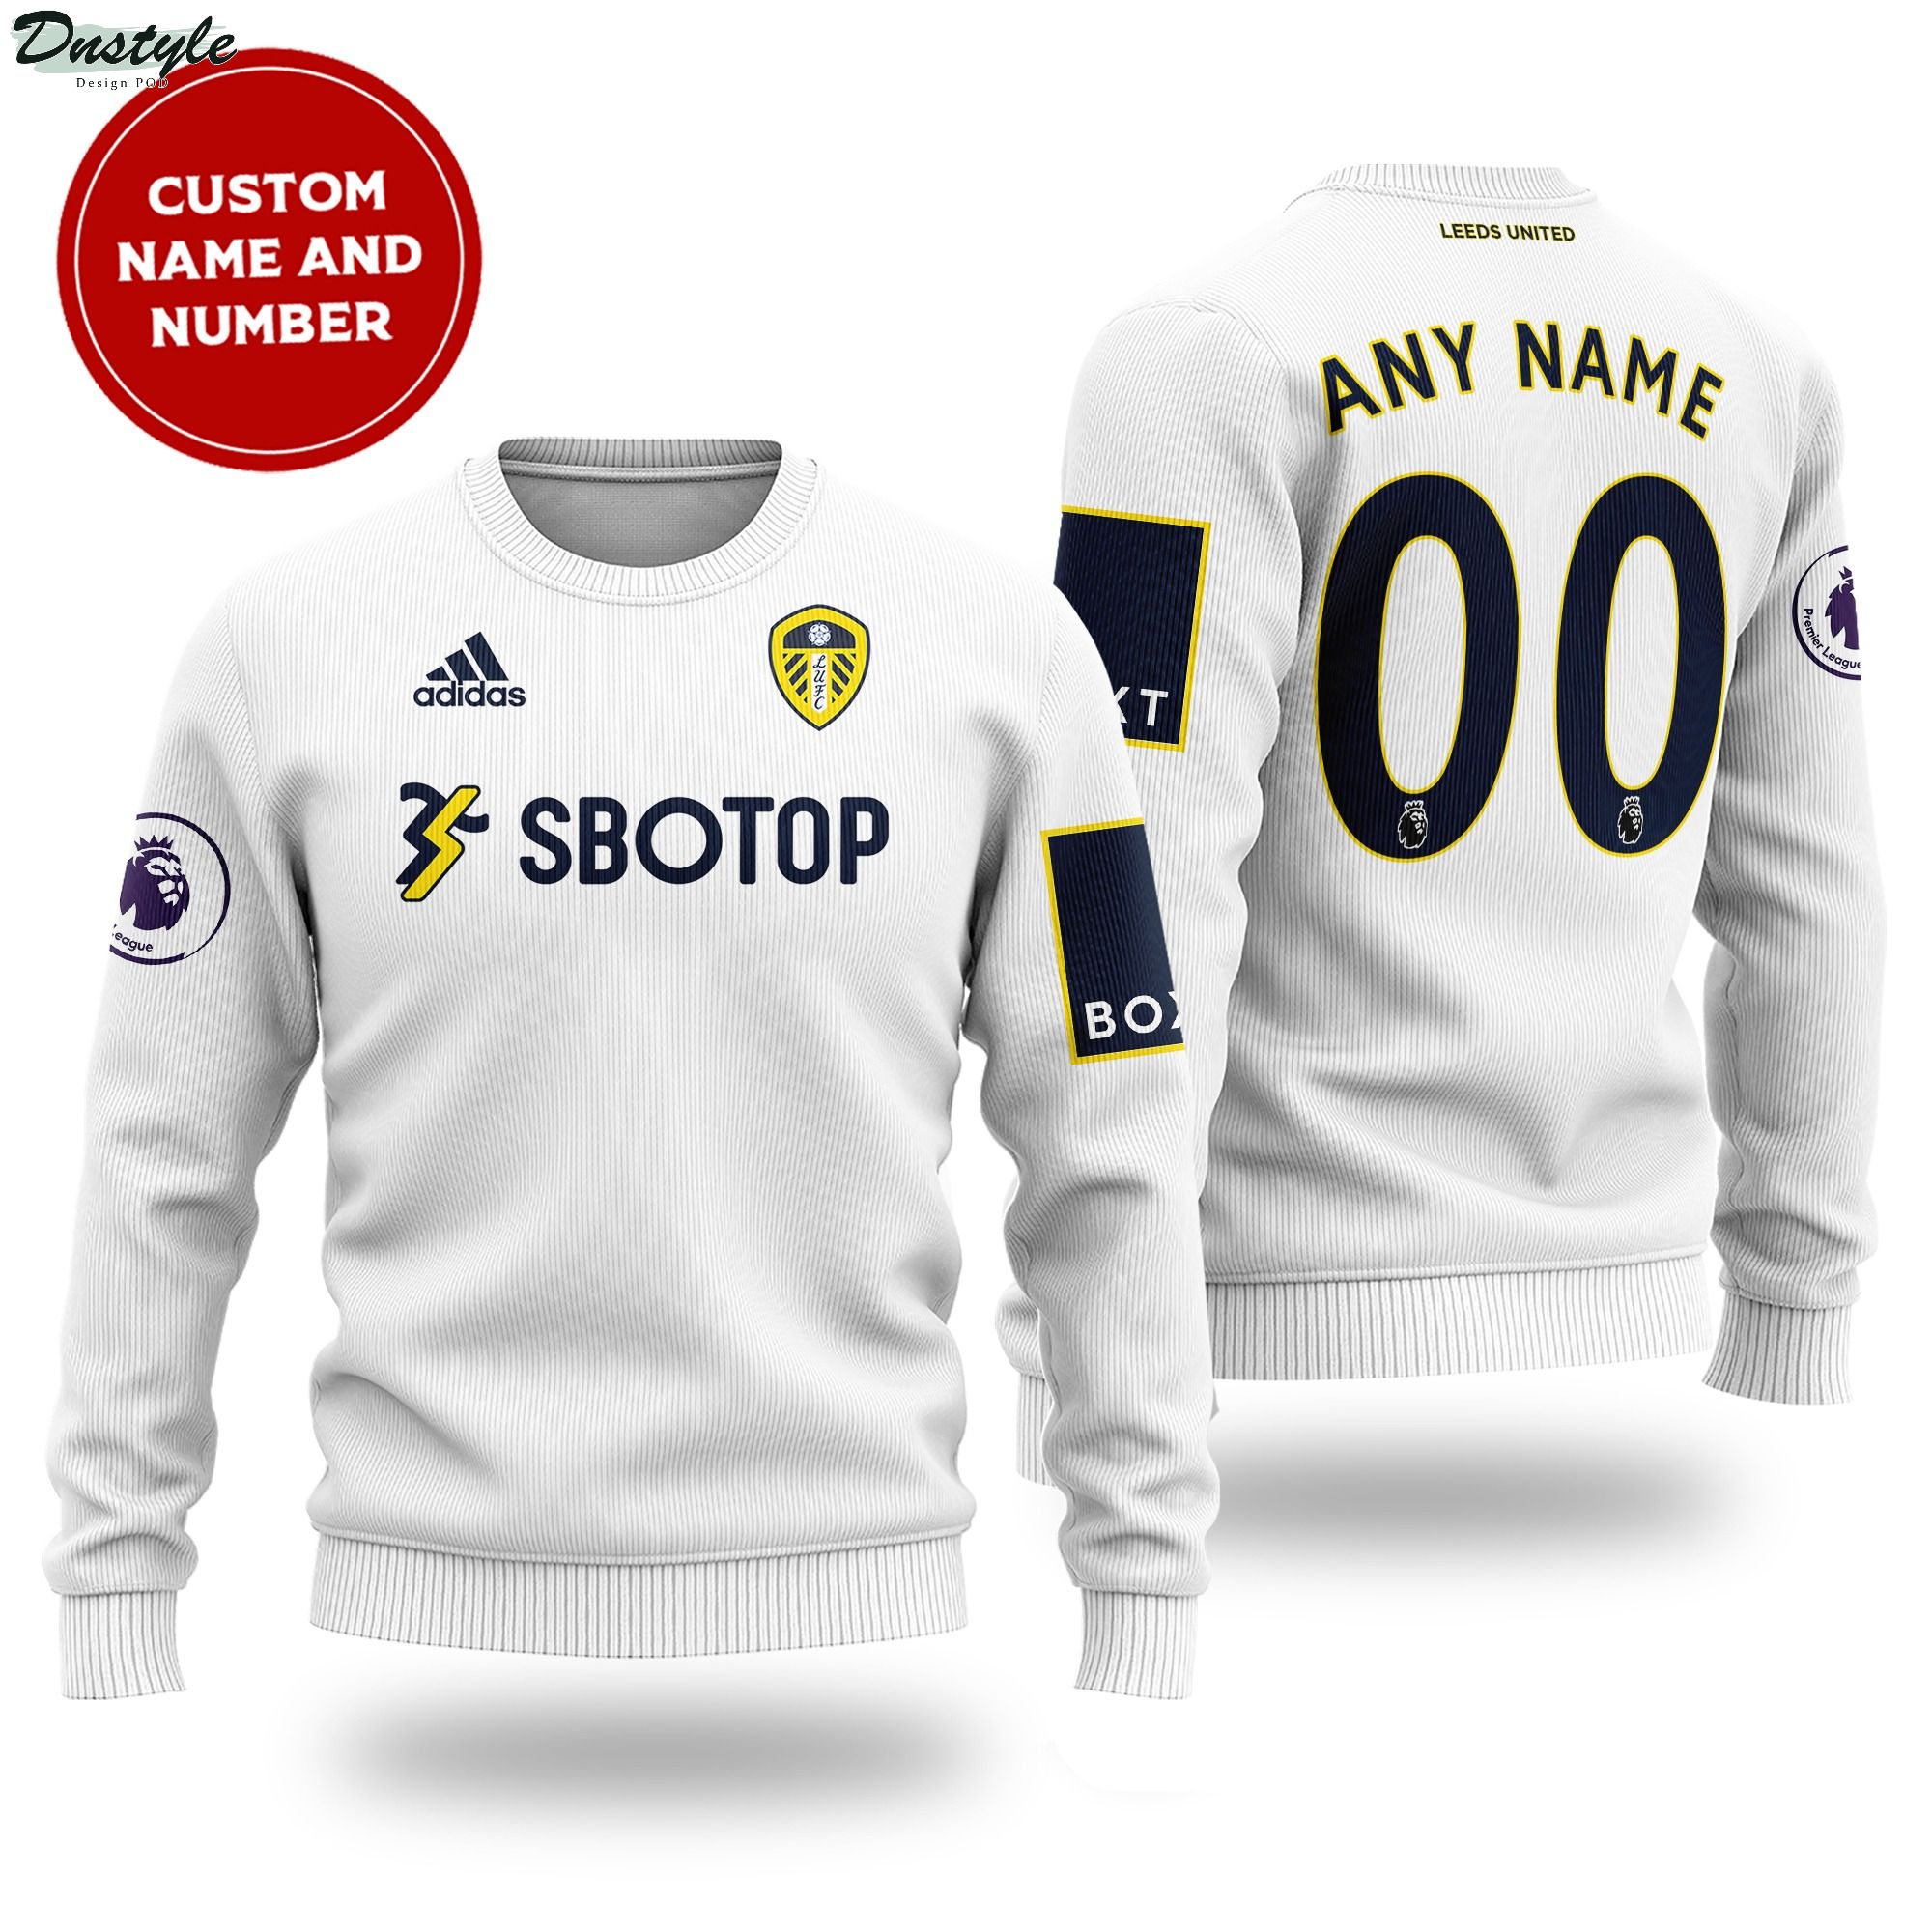 Leeds united custom name and number ugly sweater